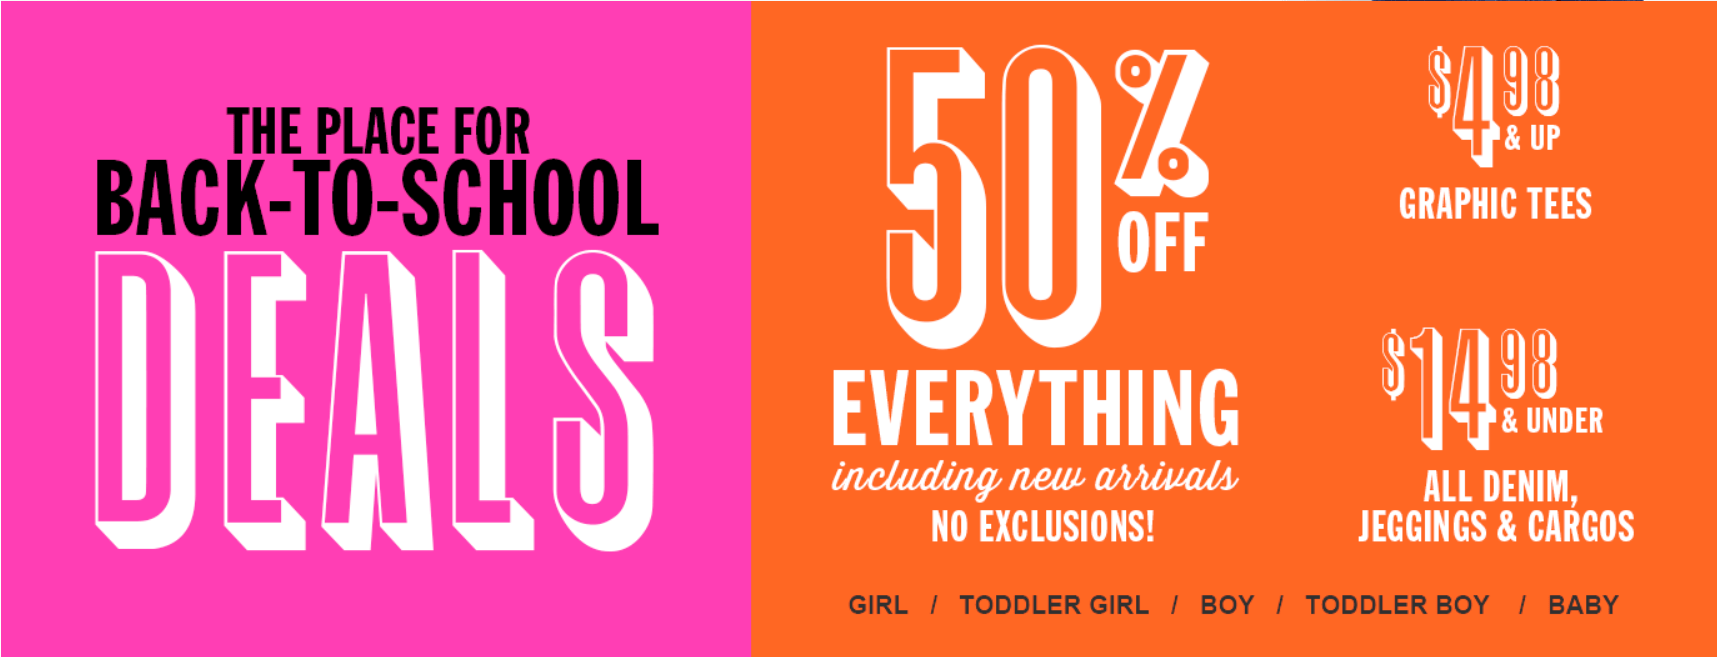 The Children s Place Canada Back To School Deals Save 50 